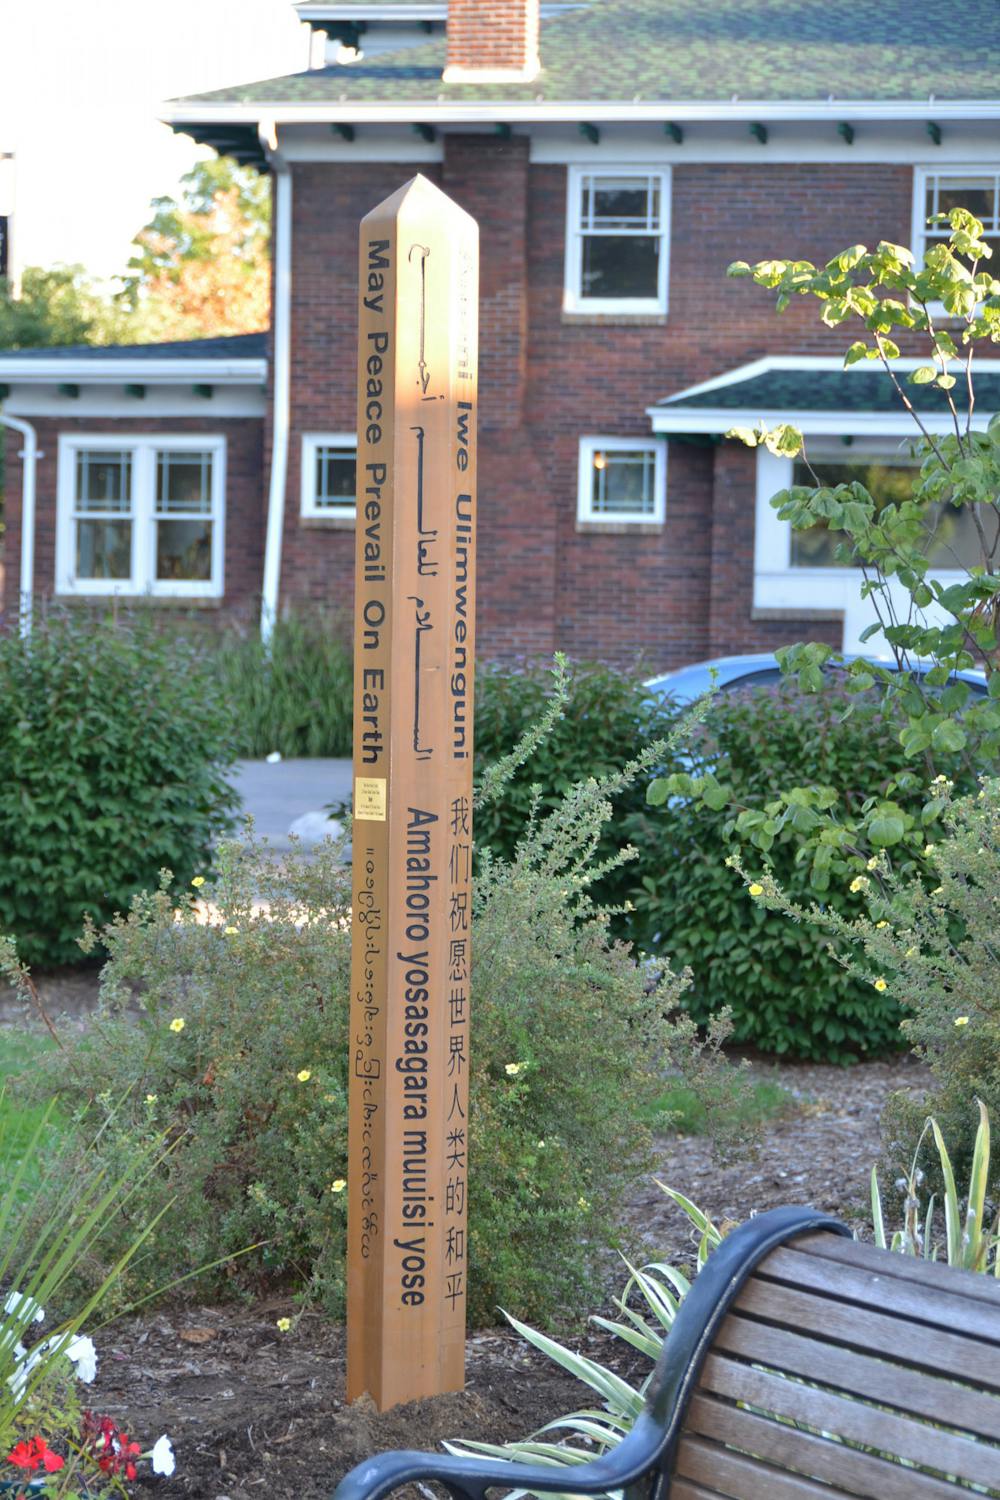 <p>The Peace Pole in William B. Sharpe Park. The picture was provided by the City of East Lansing. </p>